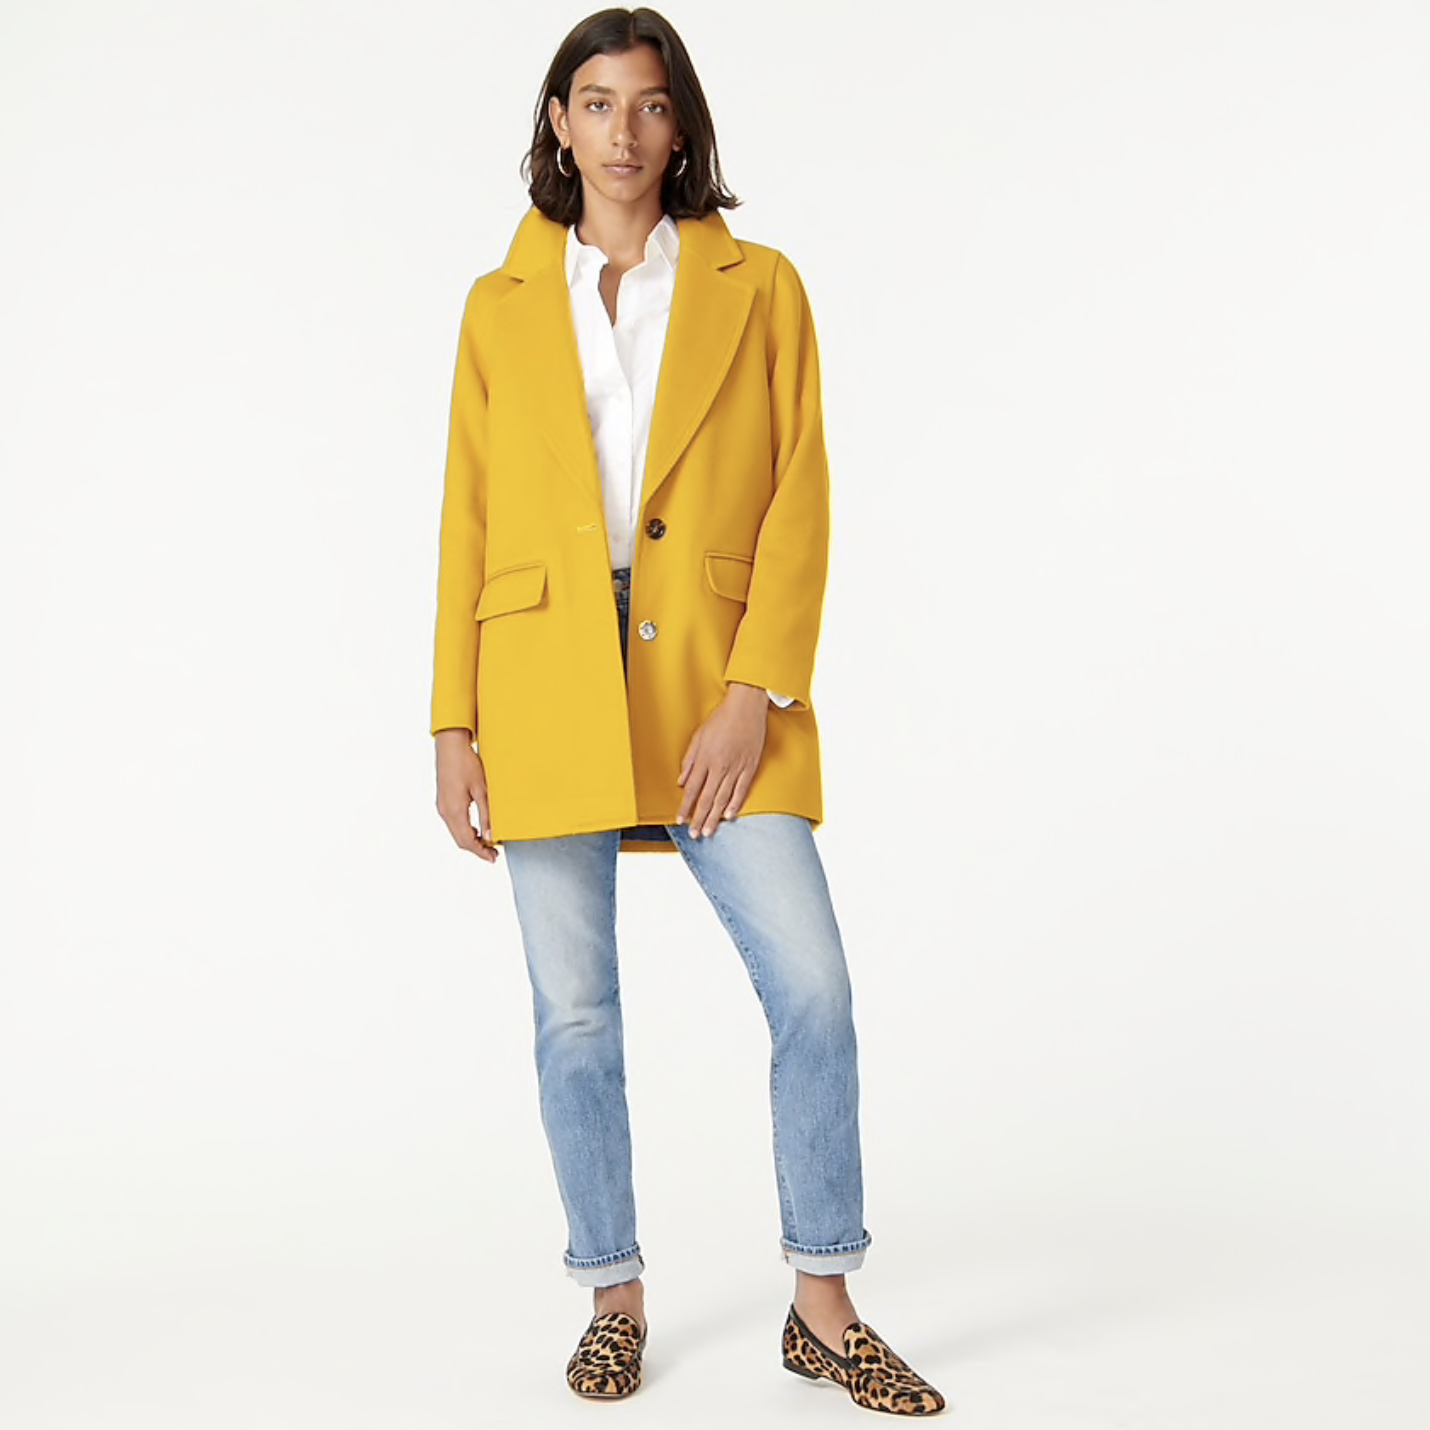 50% Off J.Crew Outerwear - Kelly in the City | Lifestyle Blog